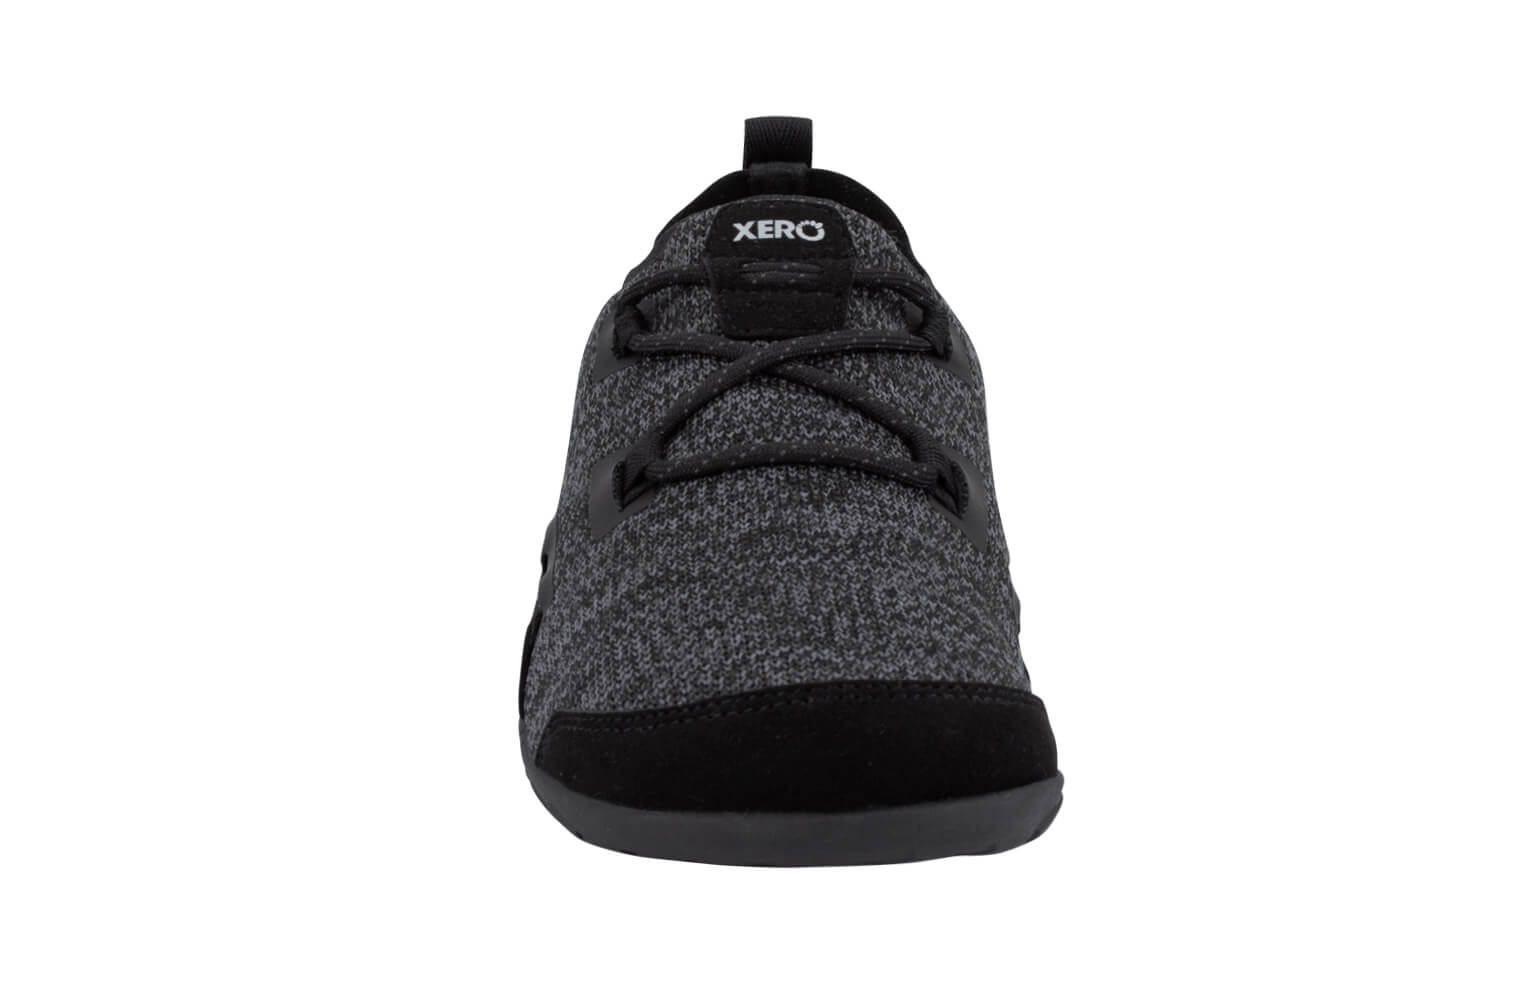 Oswego - Men's high-performance casual knit slip on by Xero Shoes